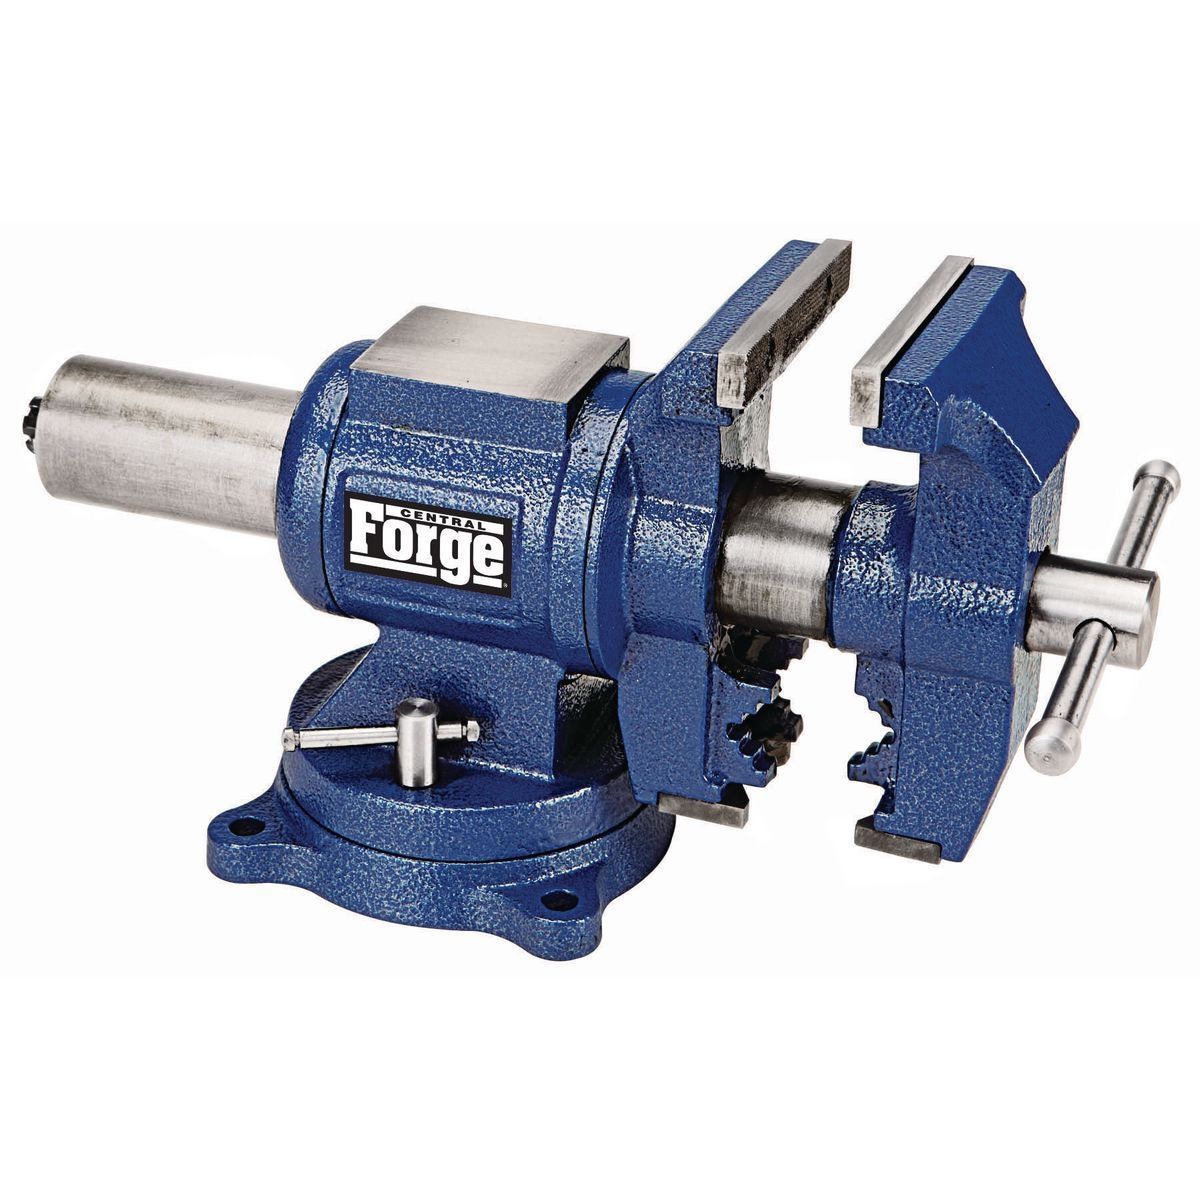 CENTRAL FORGE 5 in. Multi-Purpose Vise with Anvil